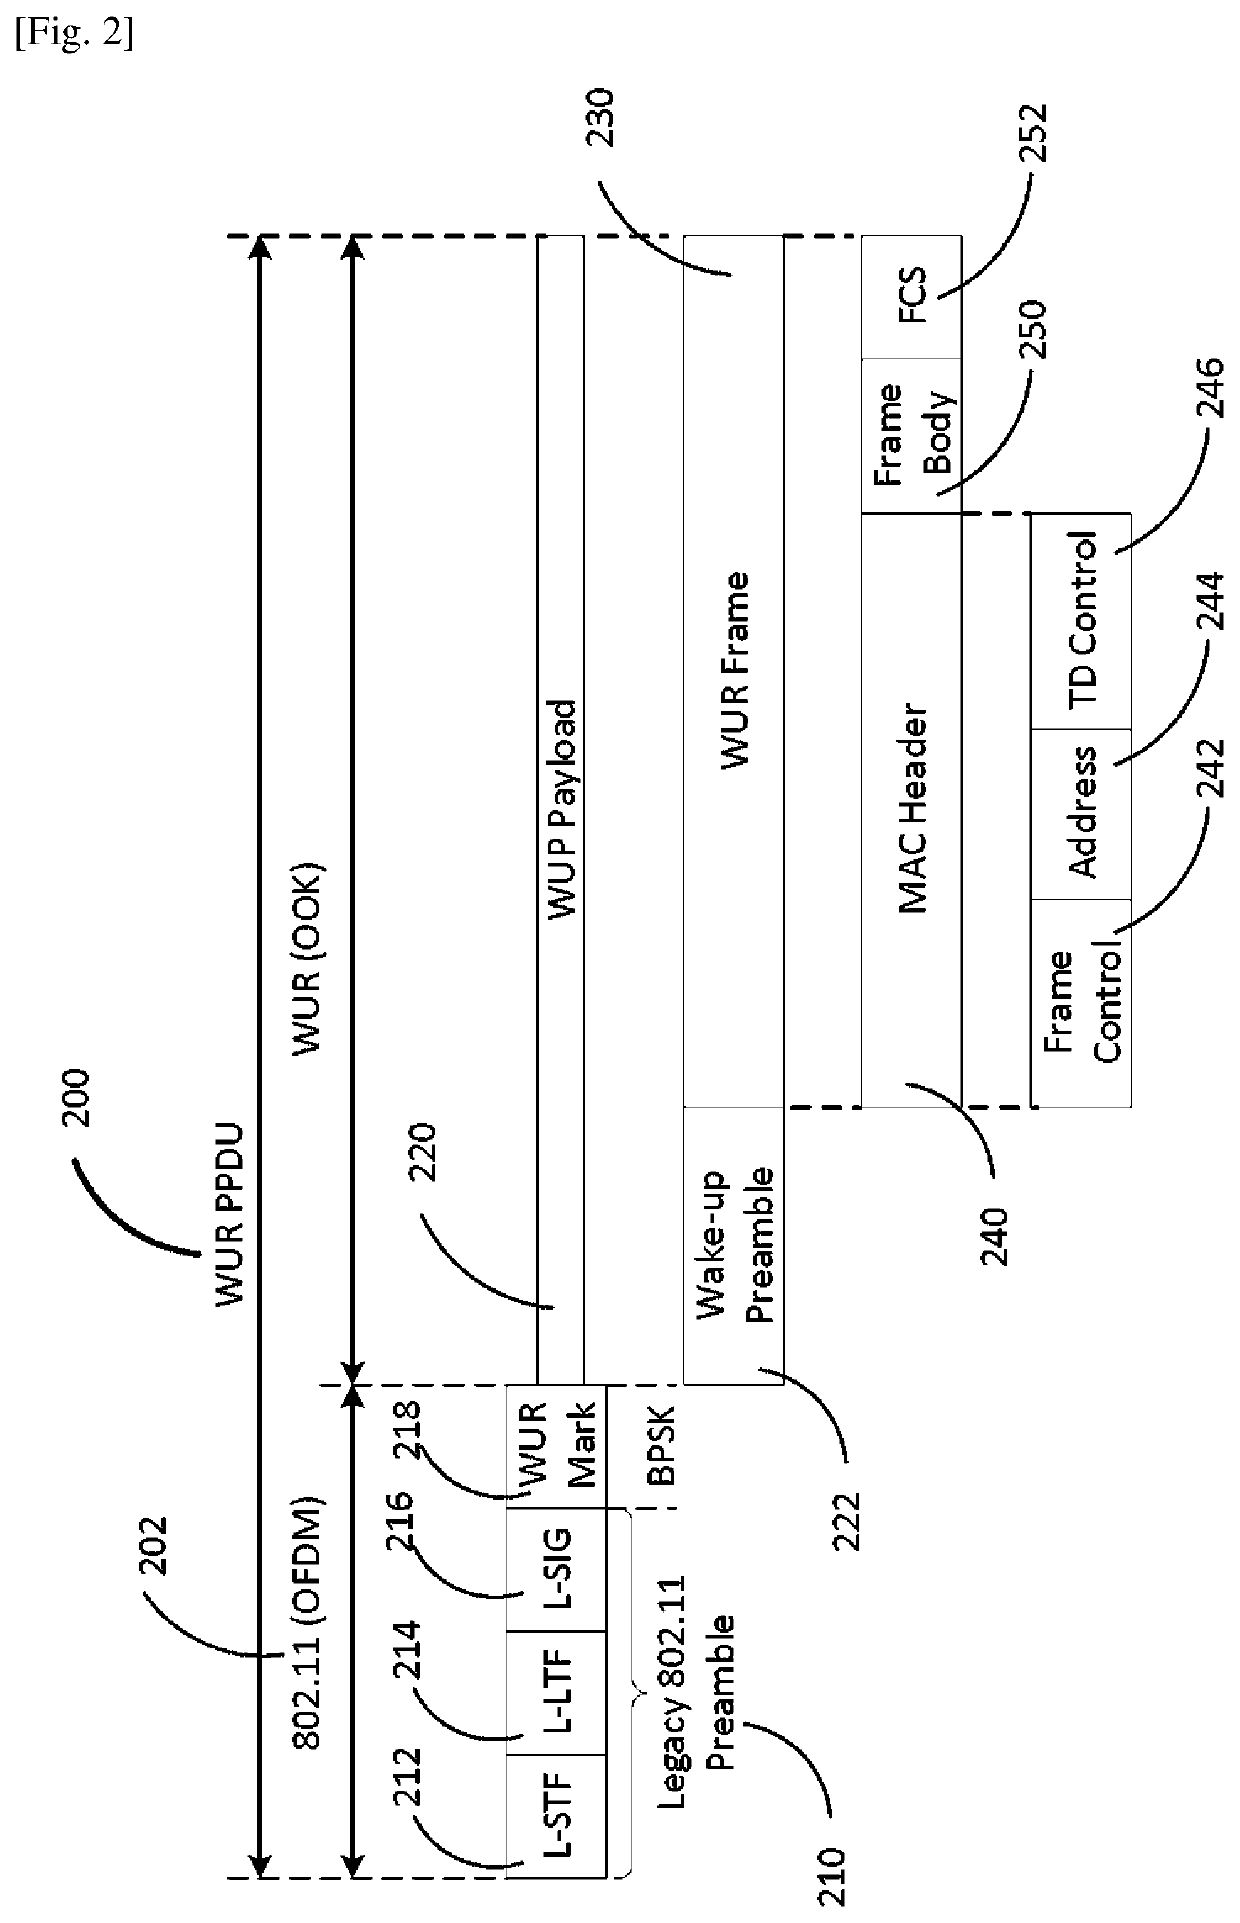 Communication apparatus and method for secure low power transmission